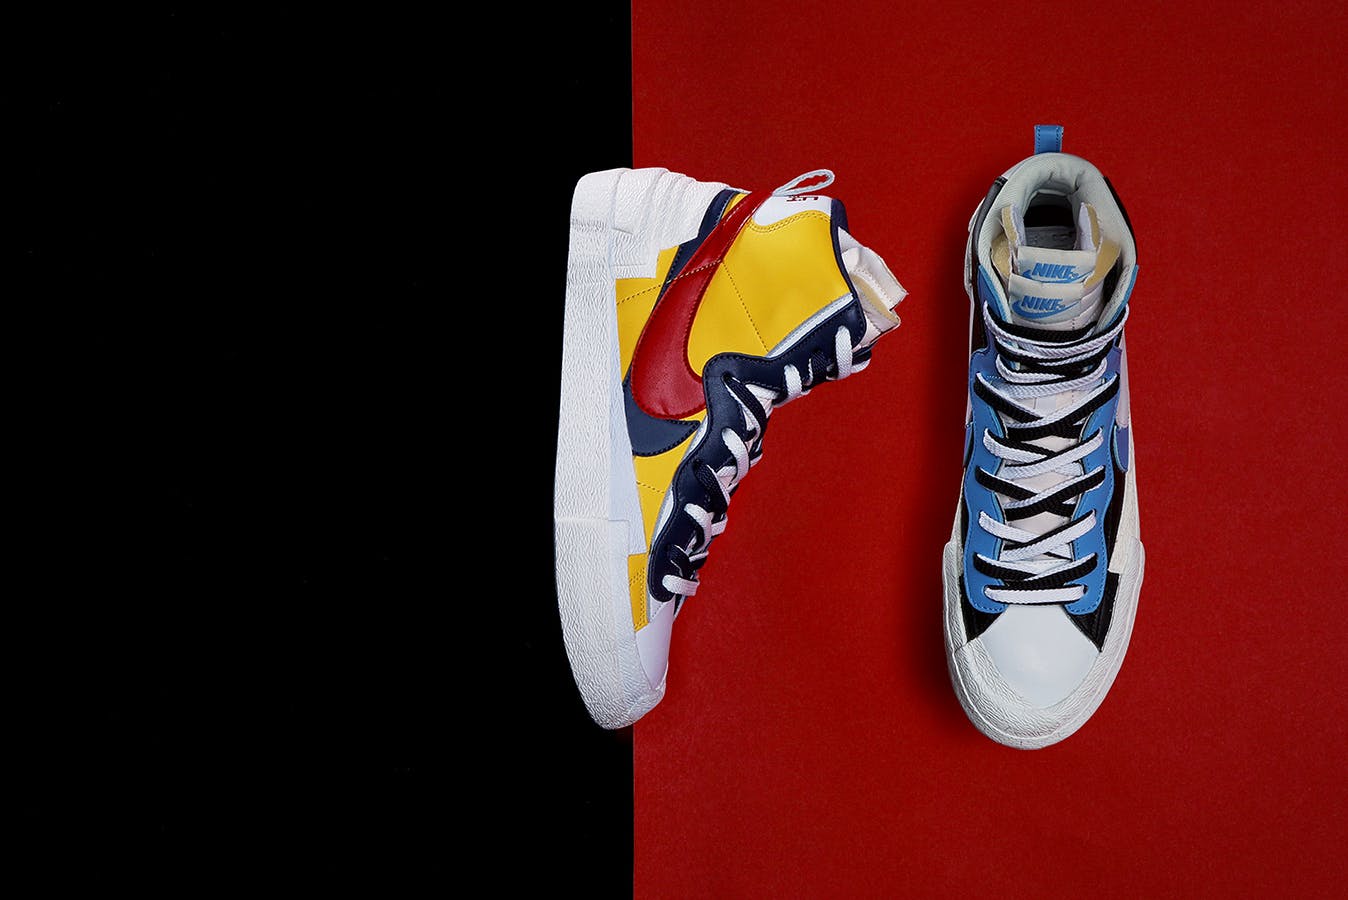 Nike x Sacai Blazer Mid - Register Now on END. Launches | END.